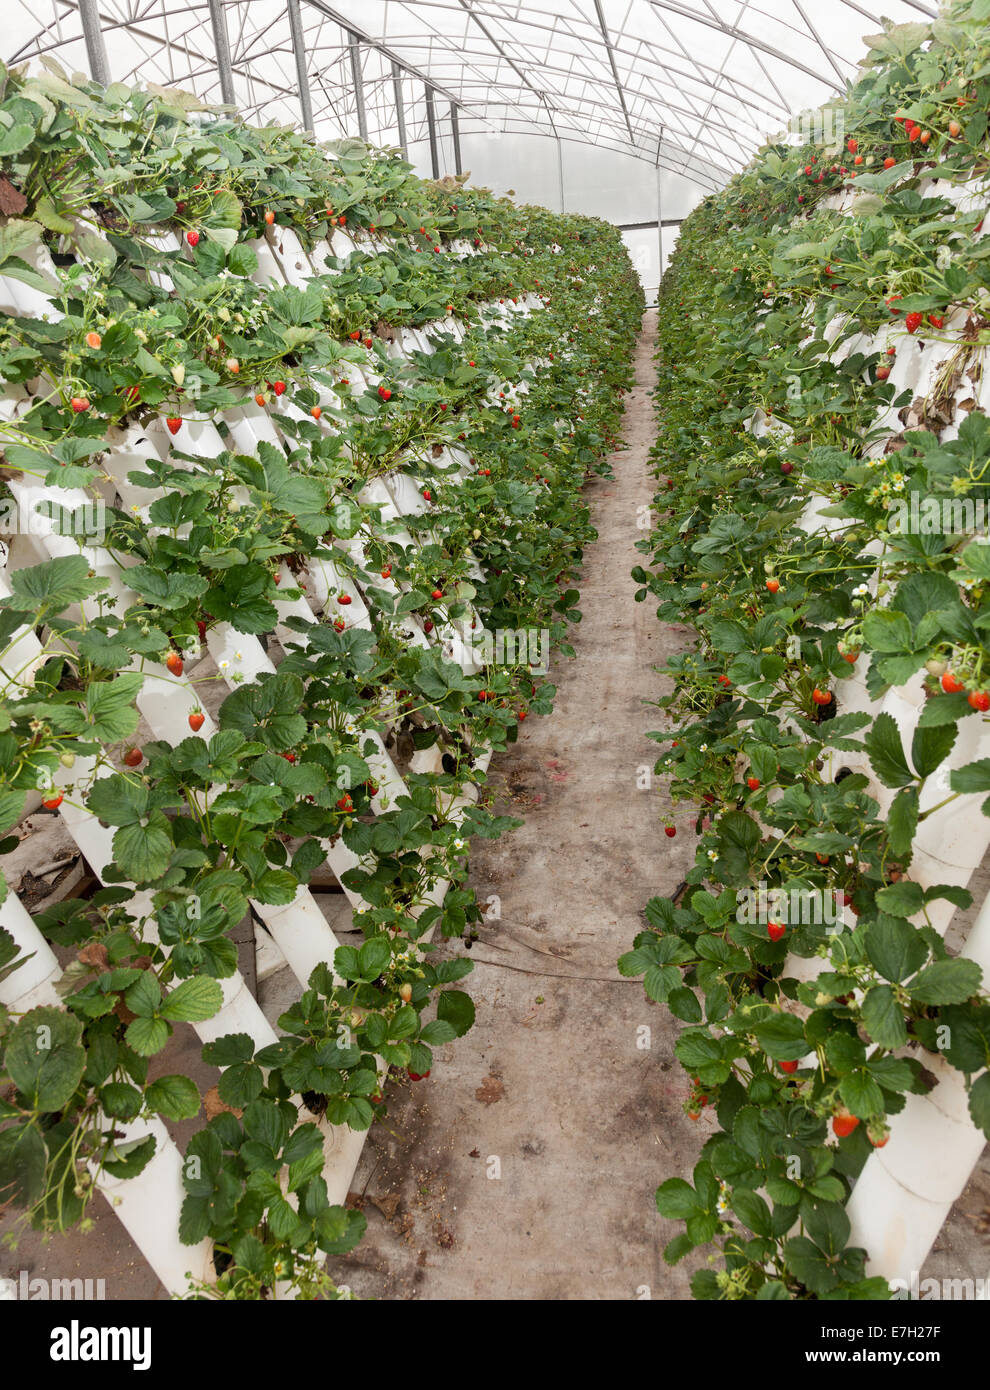 strawberries grown without soil Stock Photo